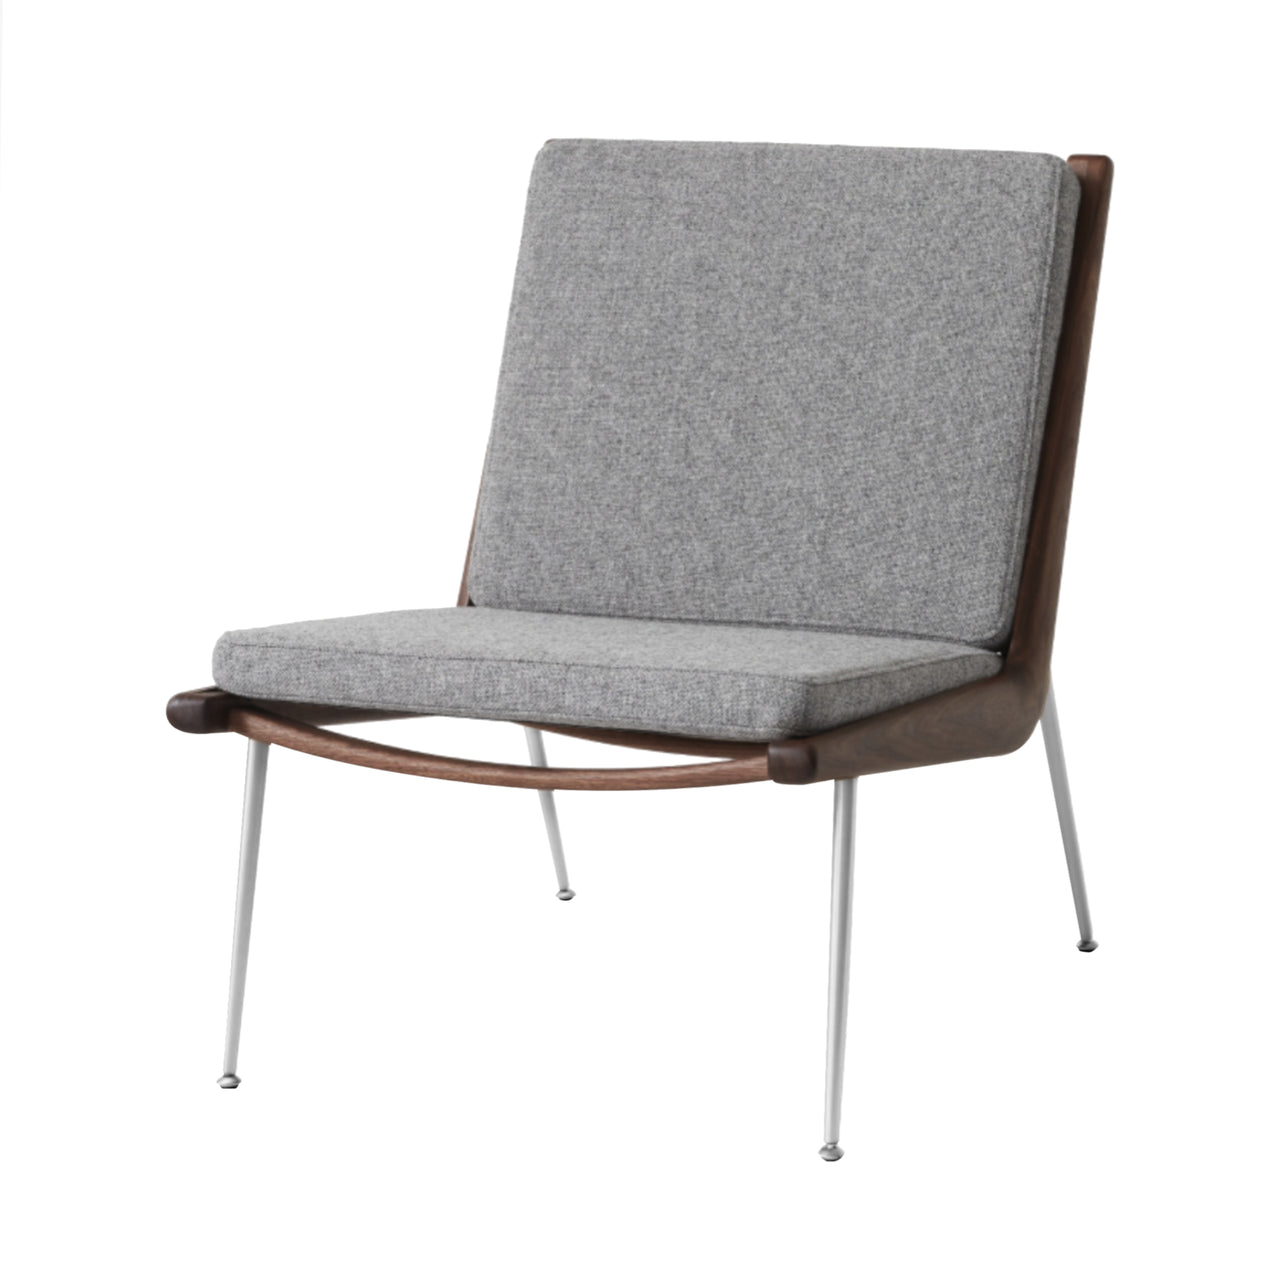 Boomerang Chair HM1: Oiled Walnut + Stainless Steel